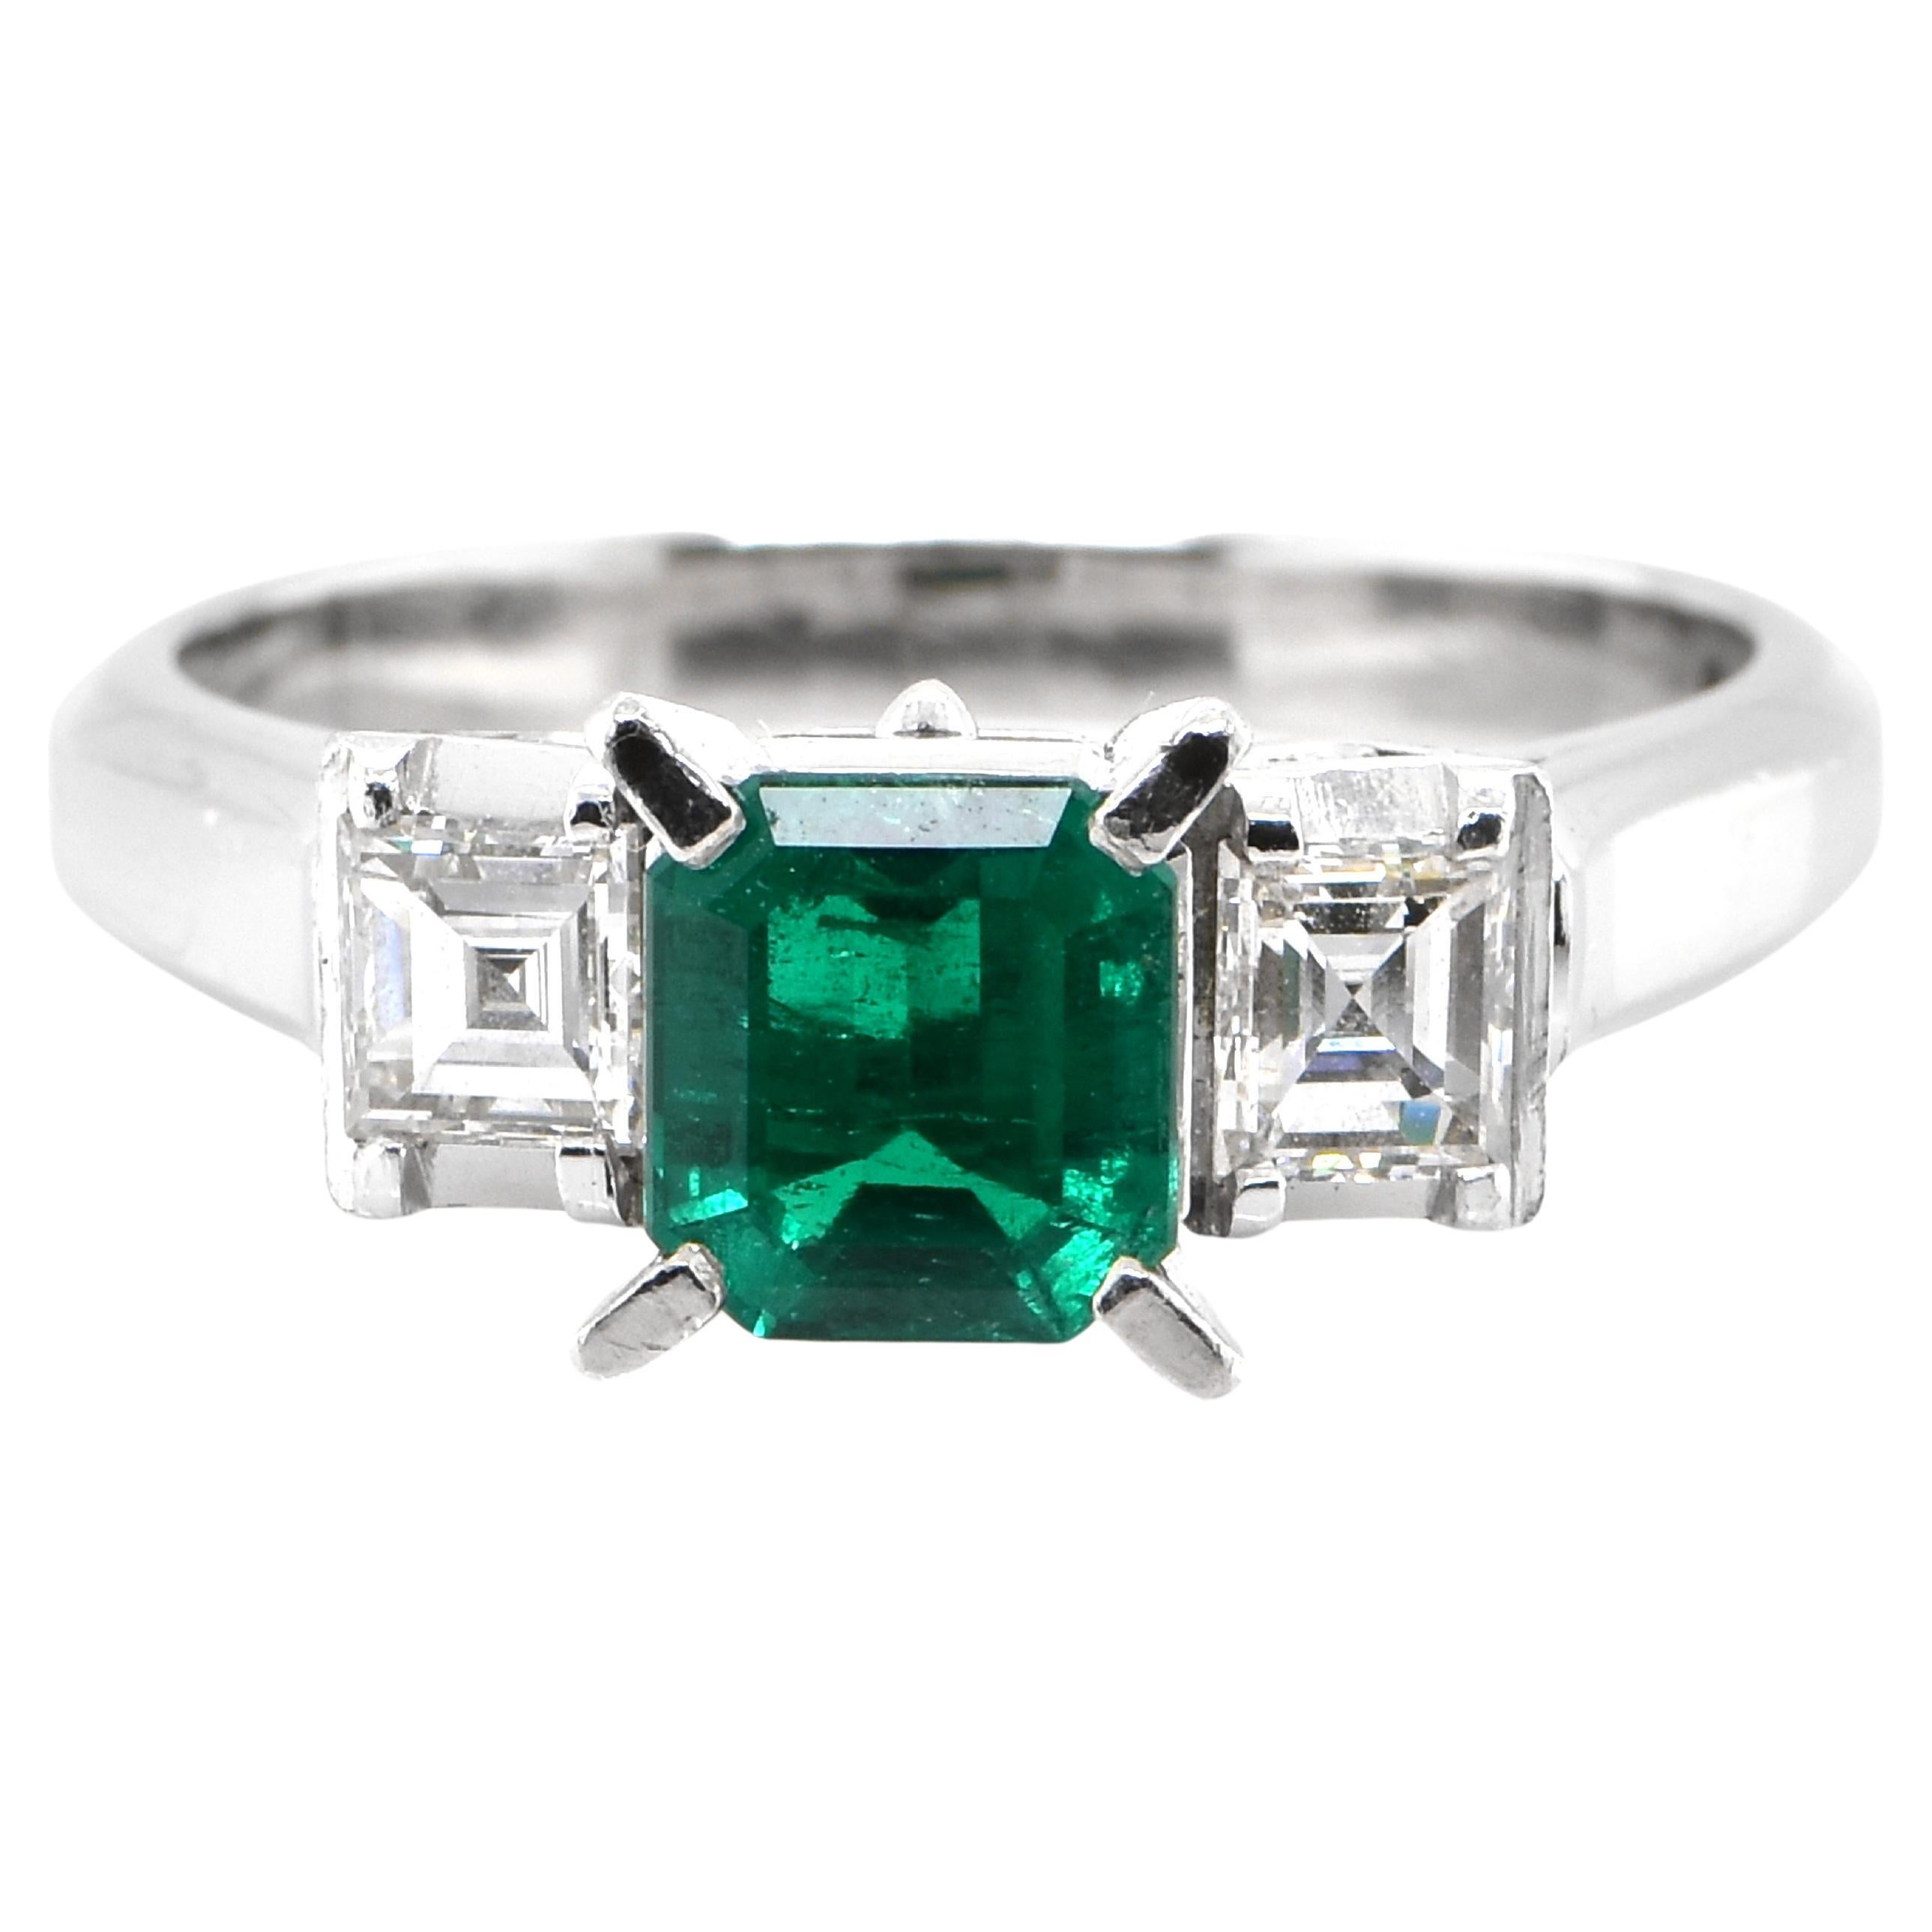 GIA Certified 0.97 Carat 'No Oil' (Untreated), Colombian Emerald & Diamond Ring